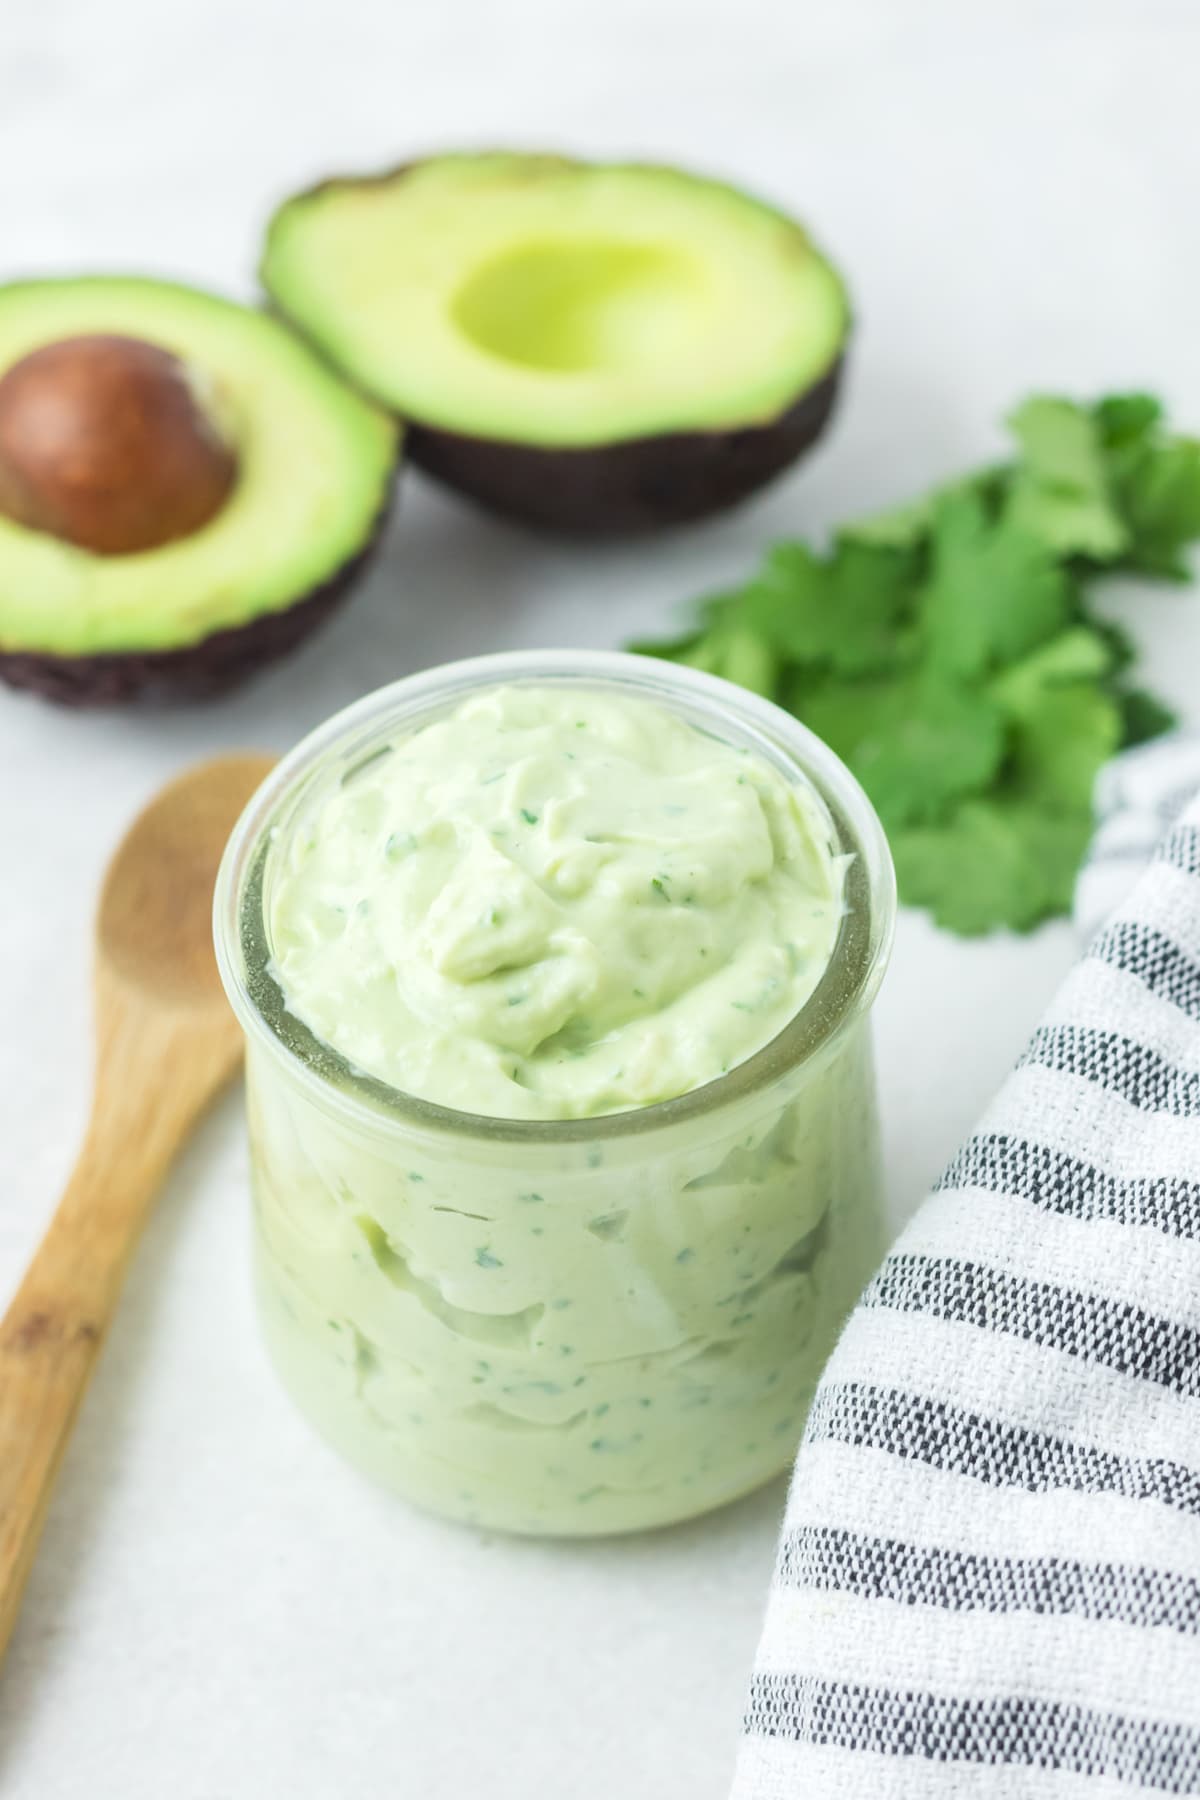 avocado crema in glass jar with wooden spoon to serve